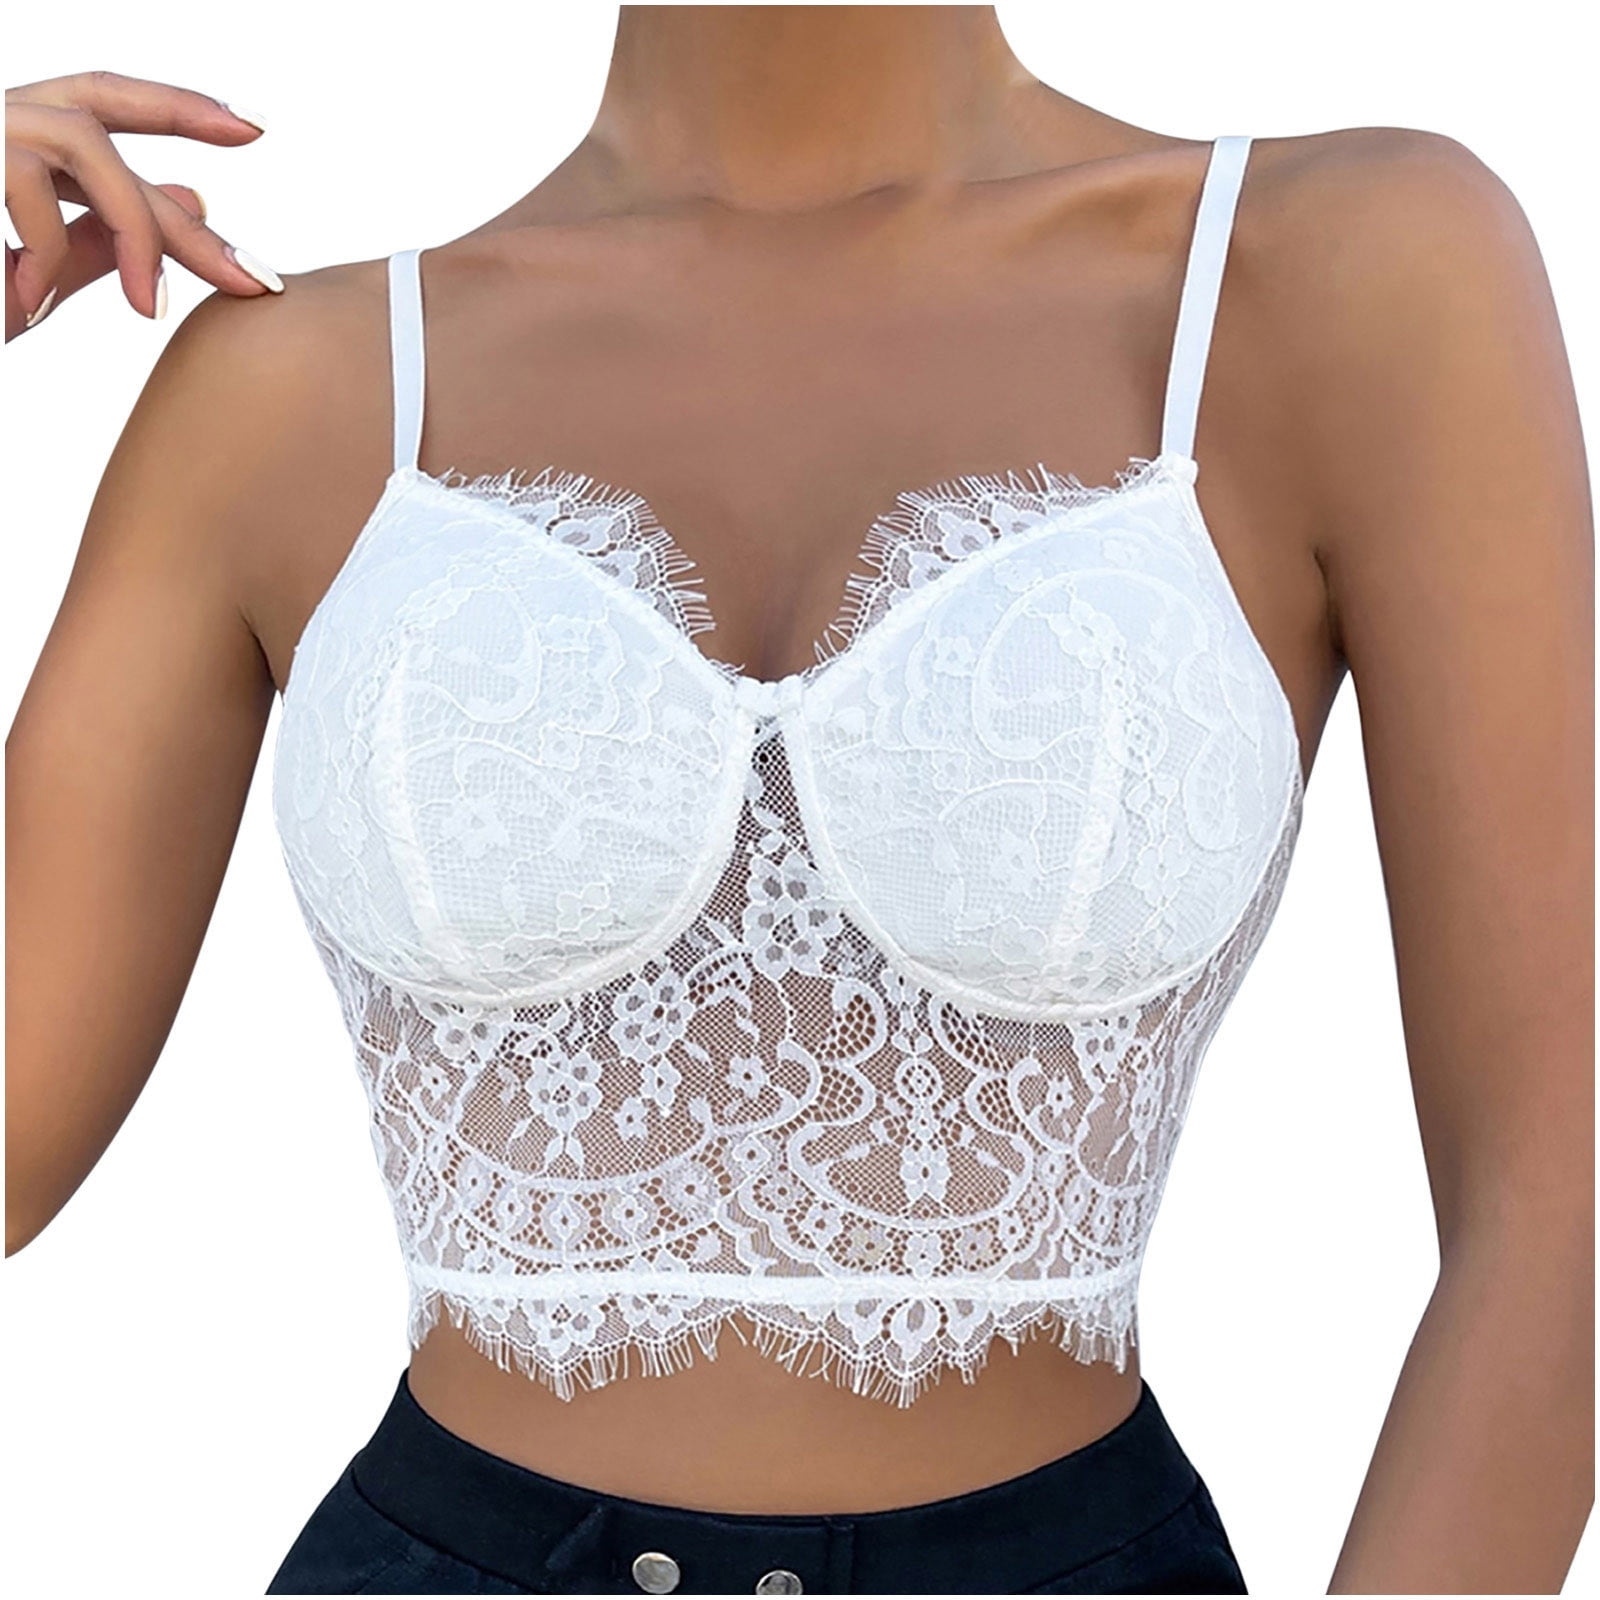 YYDGH Women's Floral Lace Cami Crop Top Spaghetti Strap Sheer Mesh